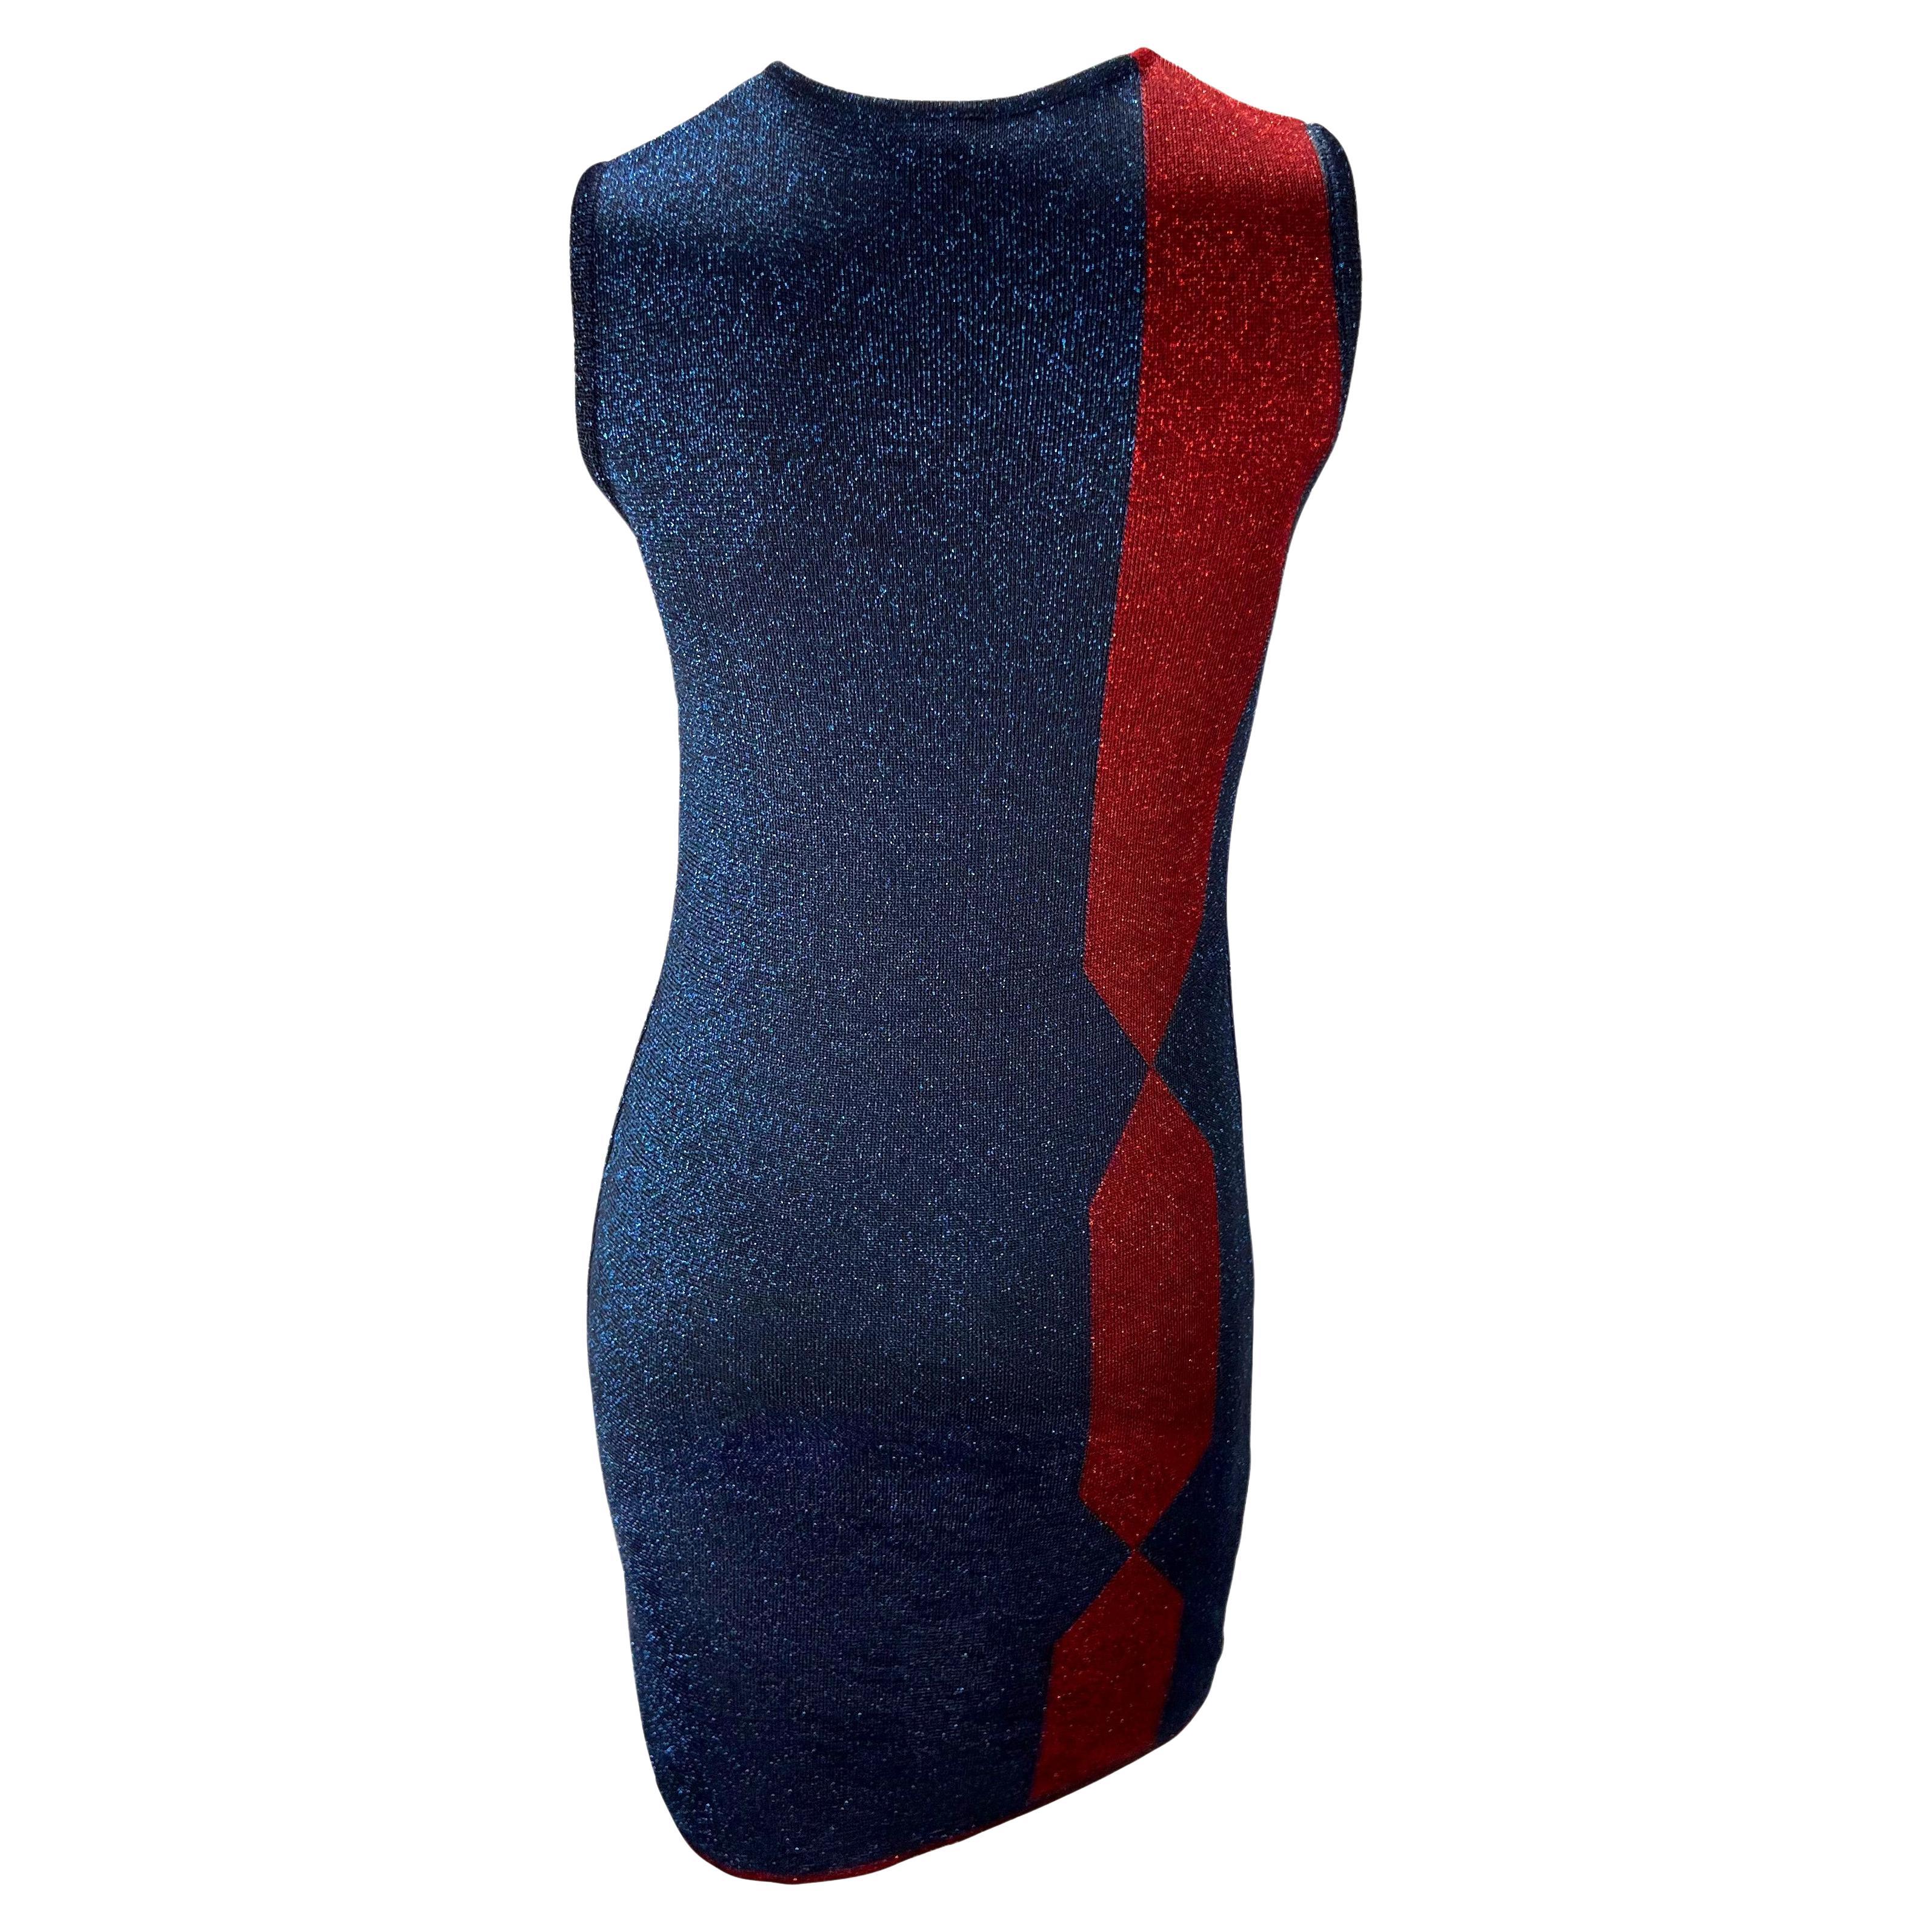 F/W 1997 Gianni Versace Couture Blue Red Lurex Sleeveless Knit Dress In Excellent Condition For Sale In West Hollywood, CA